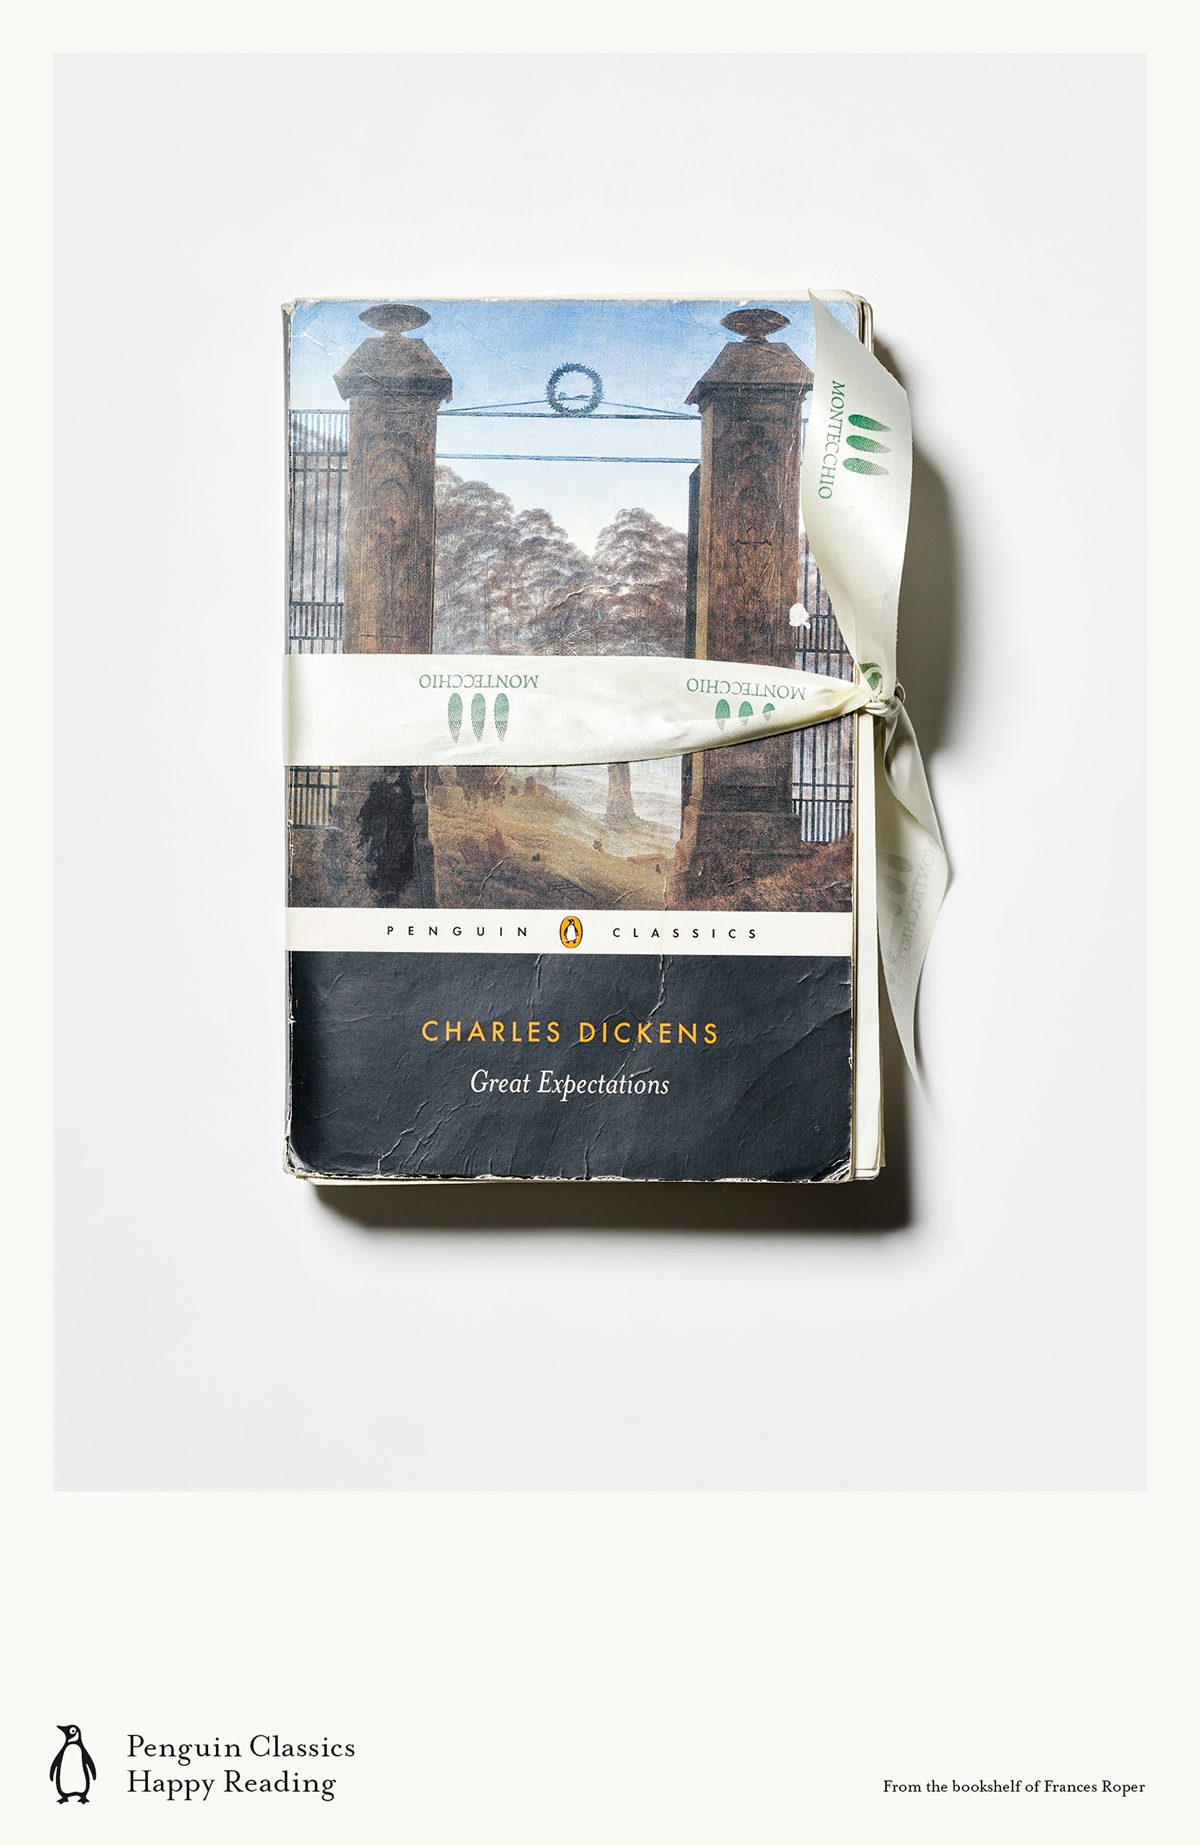 New Penguin Classics ads pay homage to old favourites, penguin classics